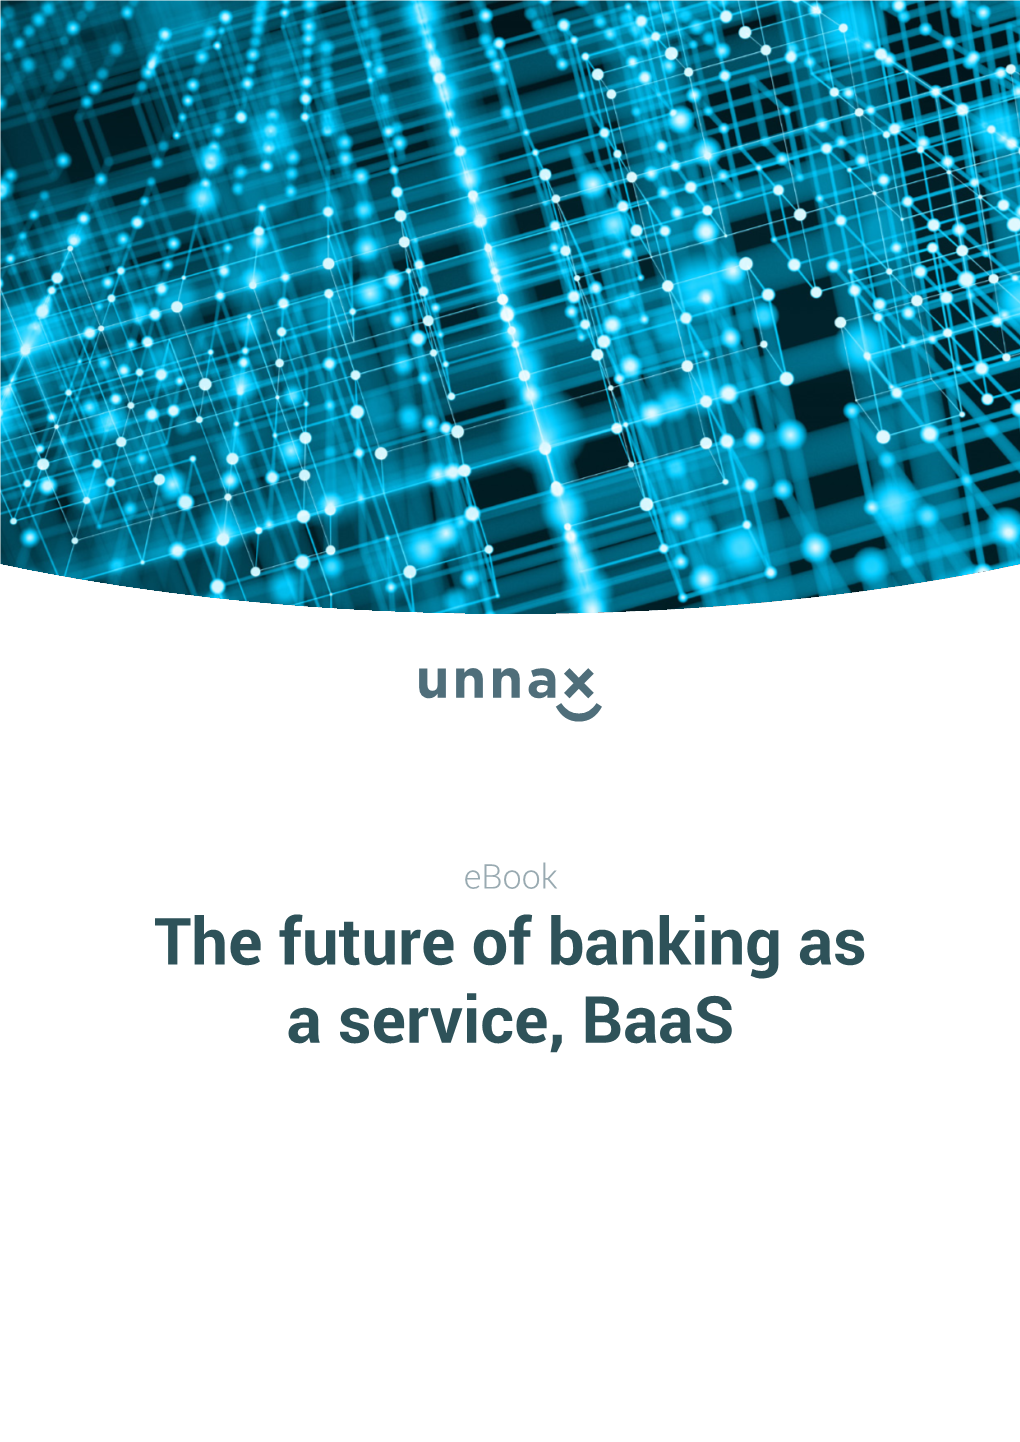 The Future of Banking As a Service, Baas the Future of Banking As a Service, Baas